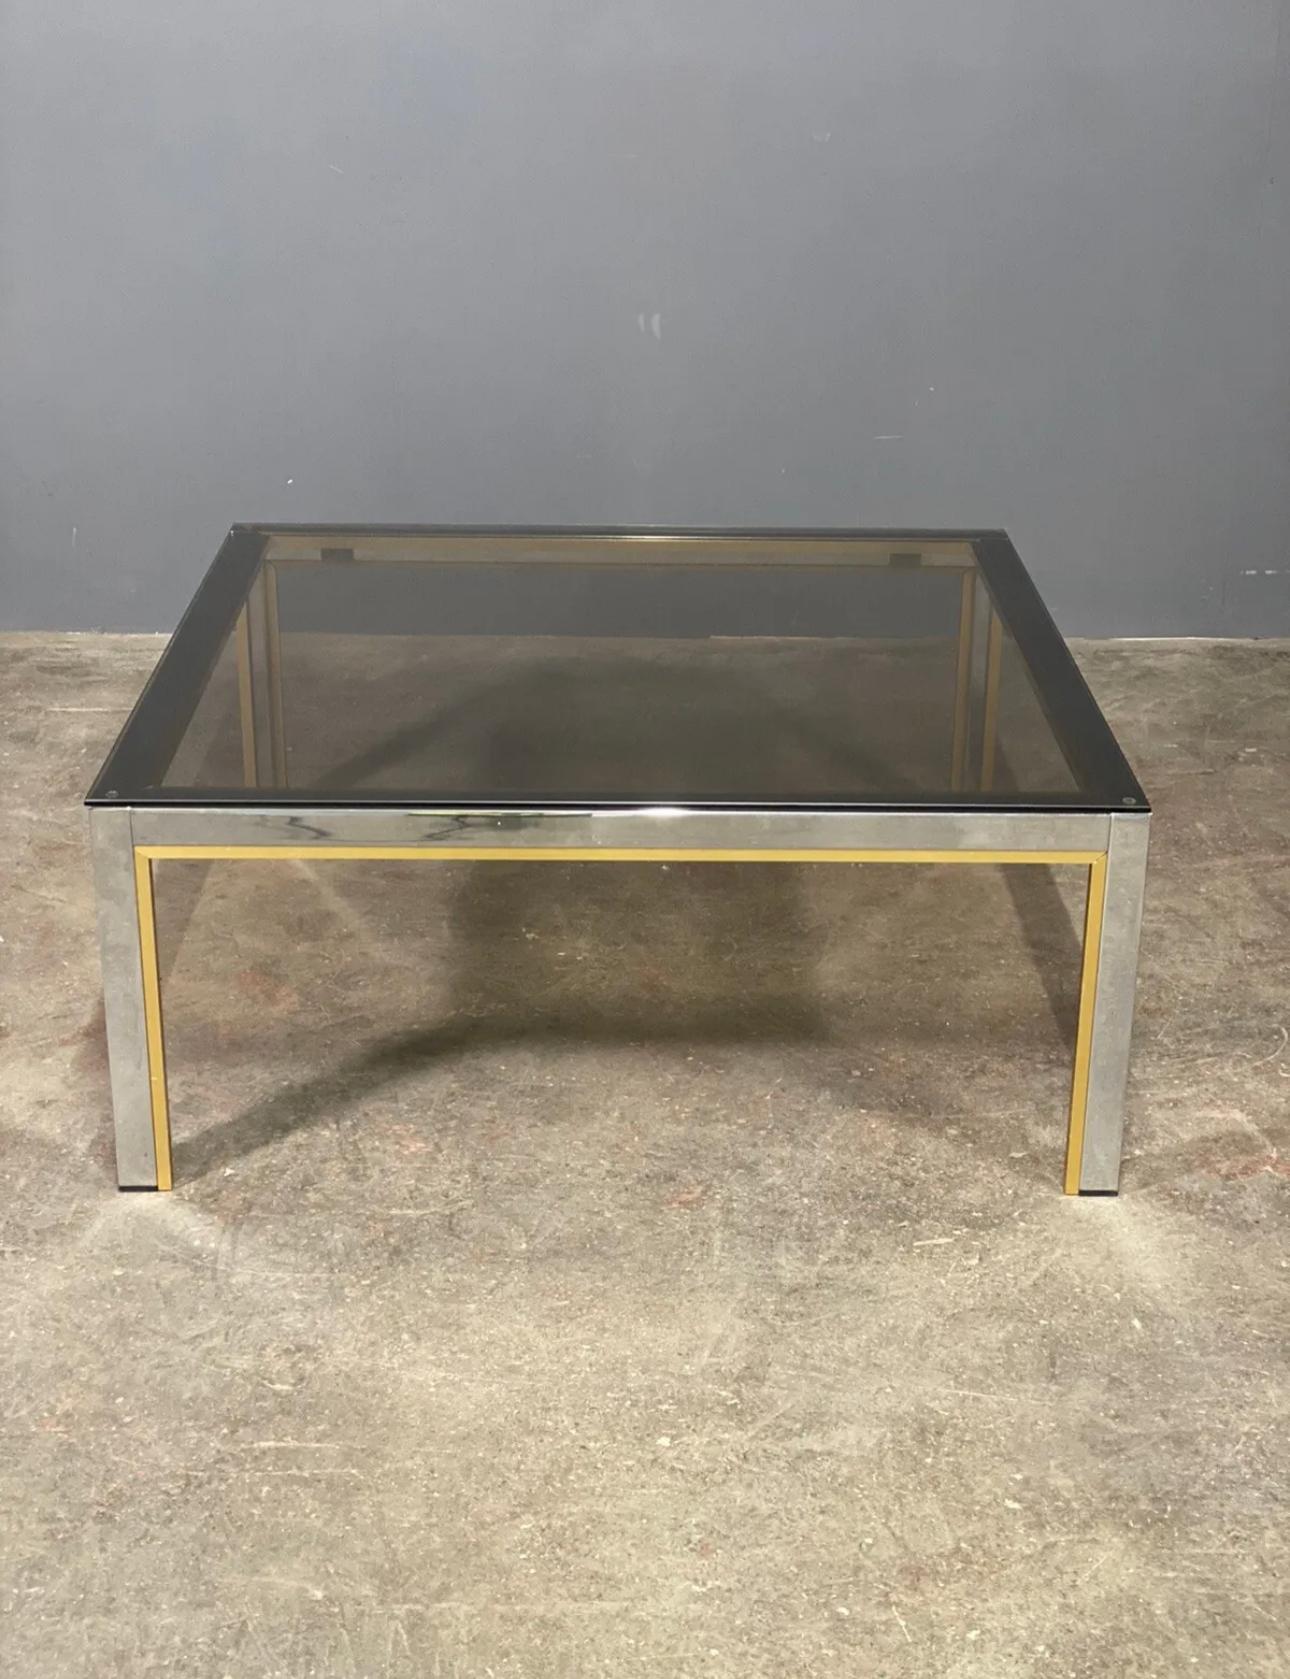 Romeo Raga large coffee table dating to the 1970’s, it has a chrome frame with brass trim and smoked glass top which is removable. In very good overall condition with very little wear.
